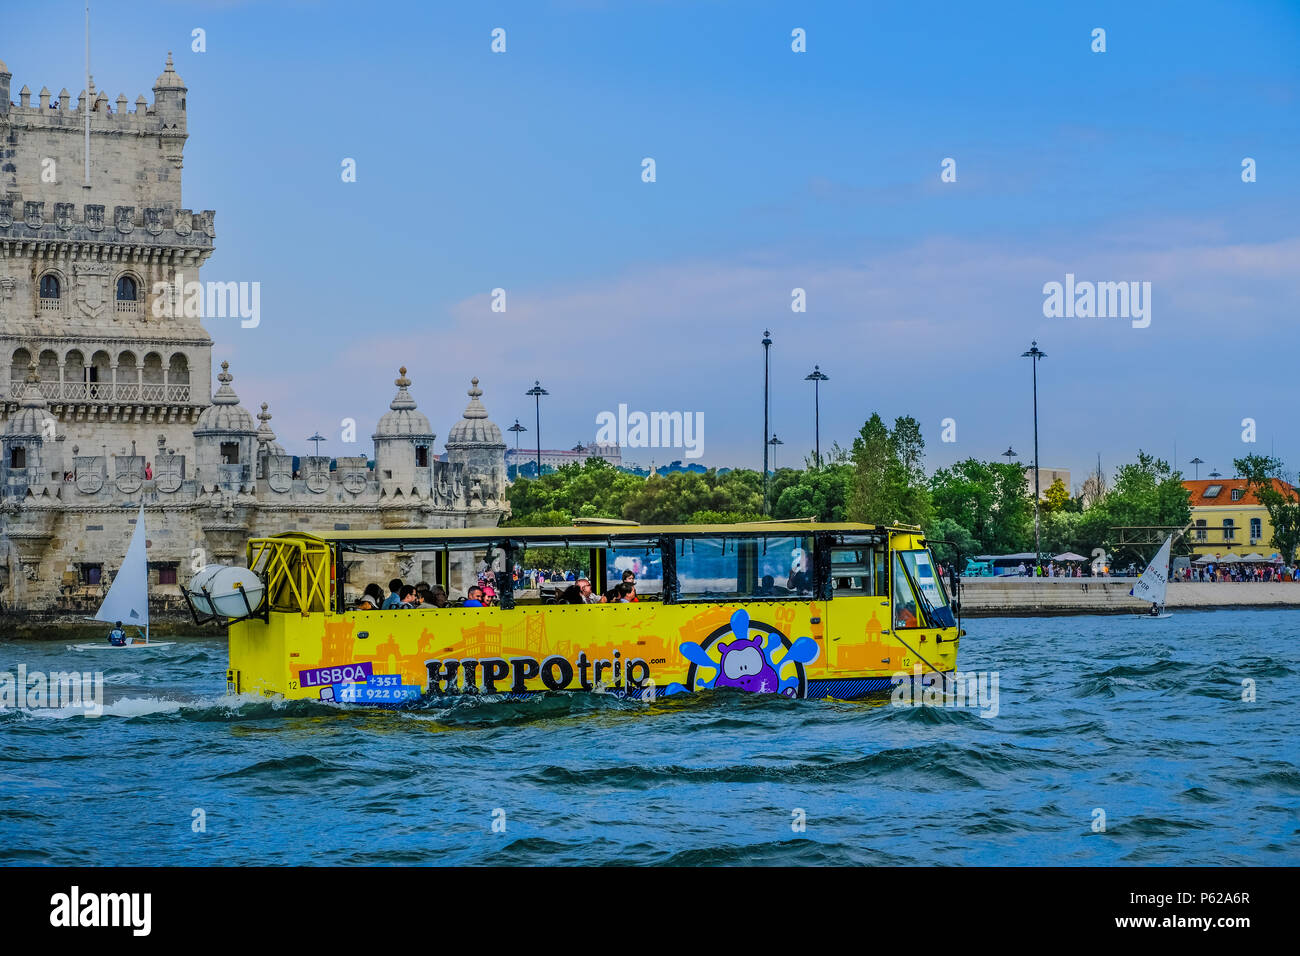 Lisbon, Portugal, May 26, 2018; View of amphibian vehicle Hippo giving tour along Tagus River with Belém Tower and other city buildings in background Stock Photo